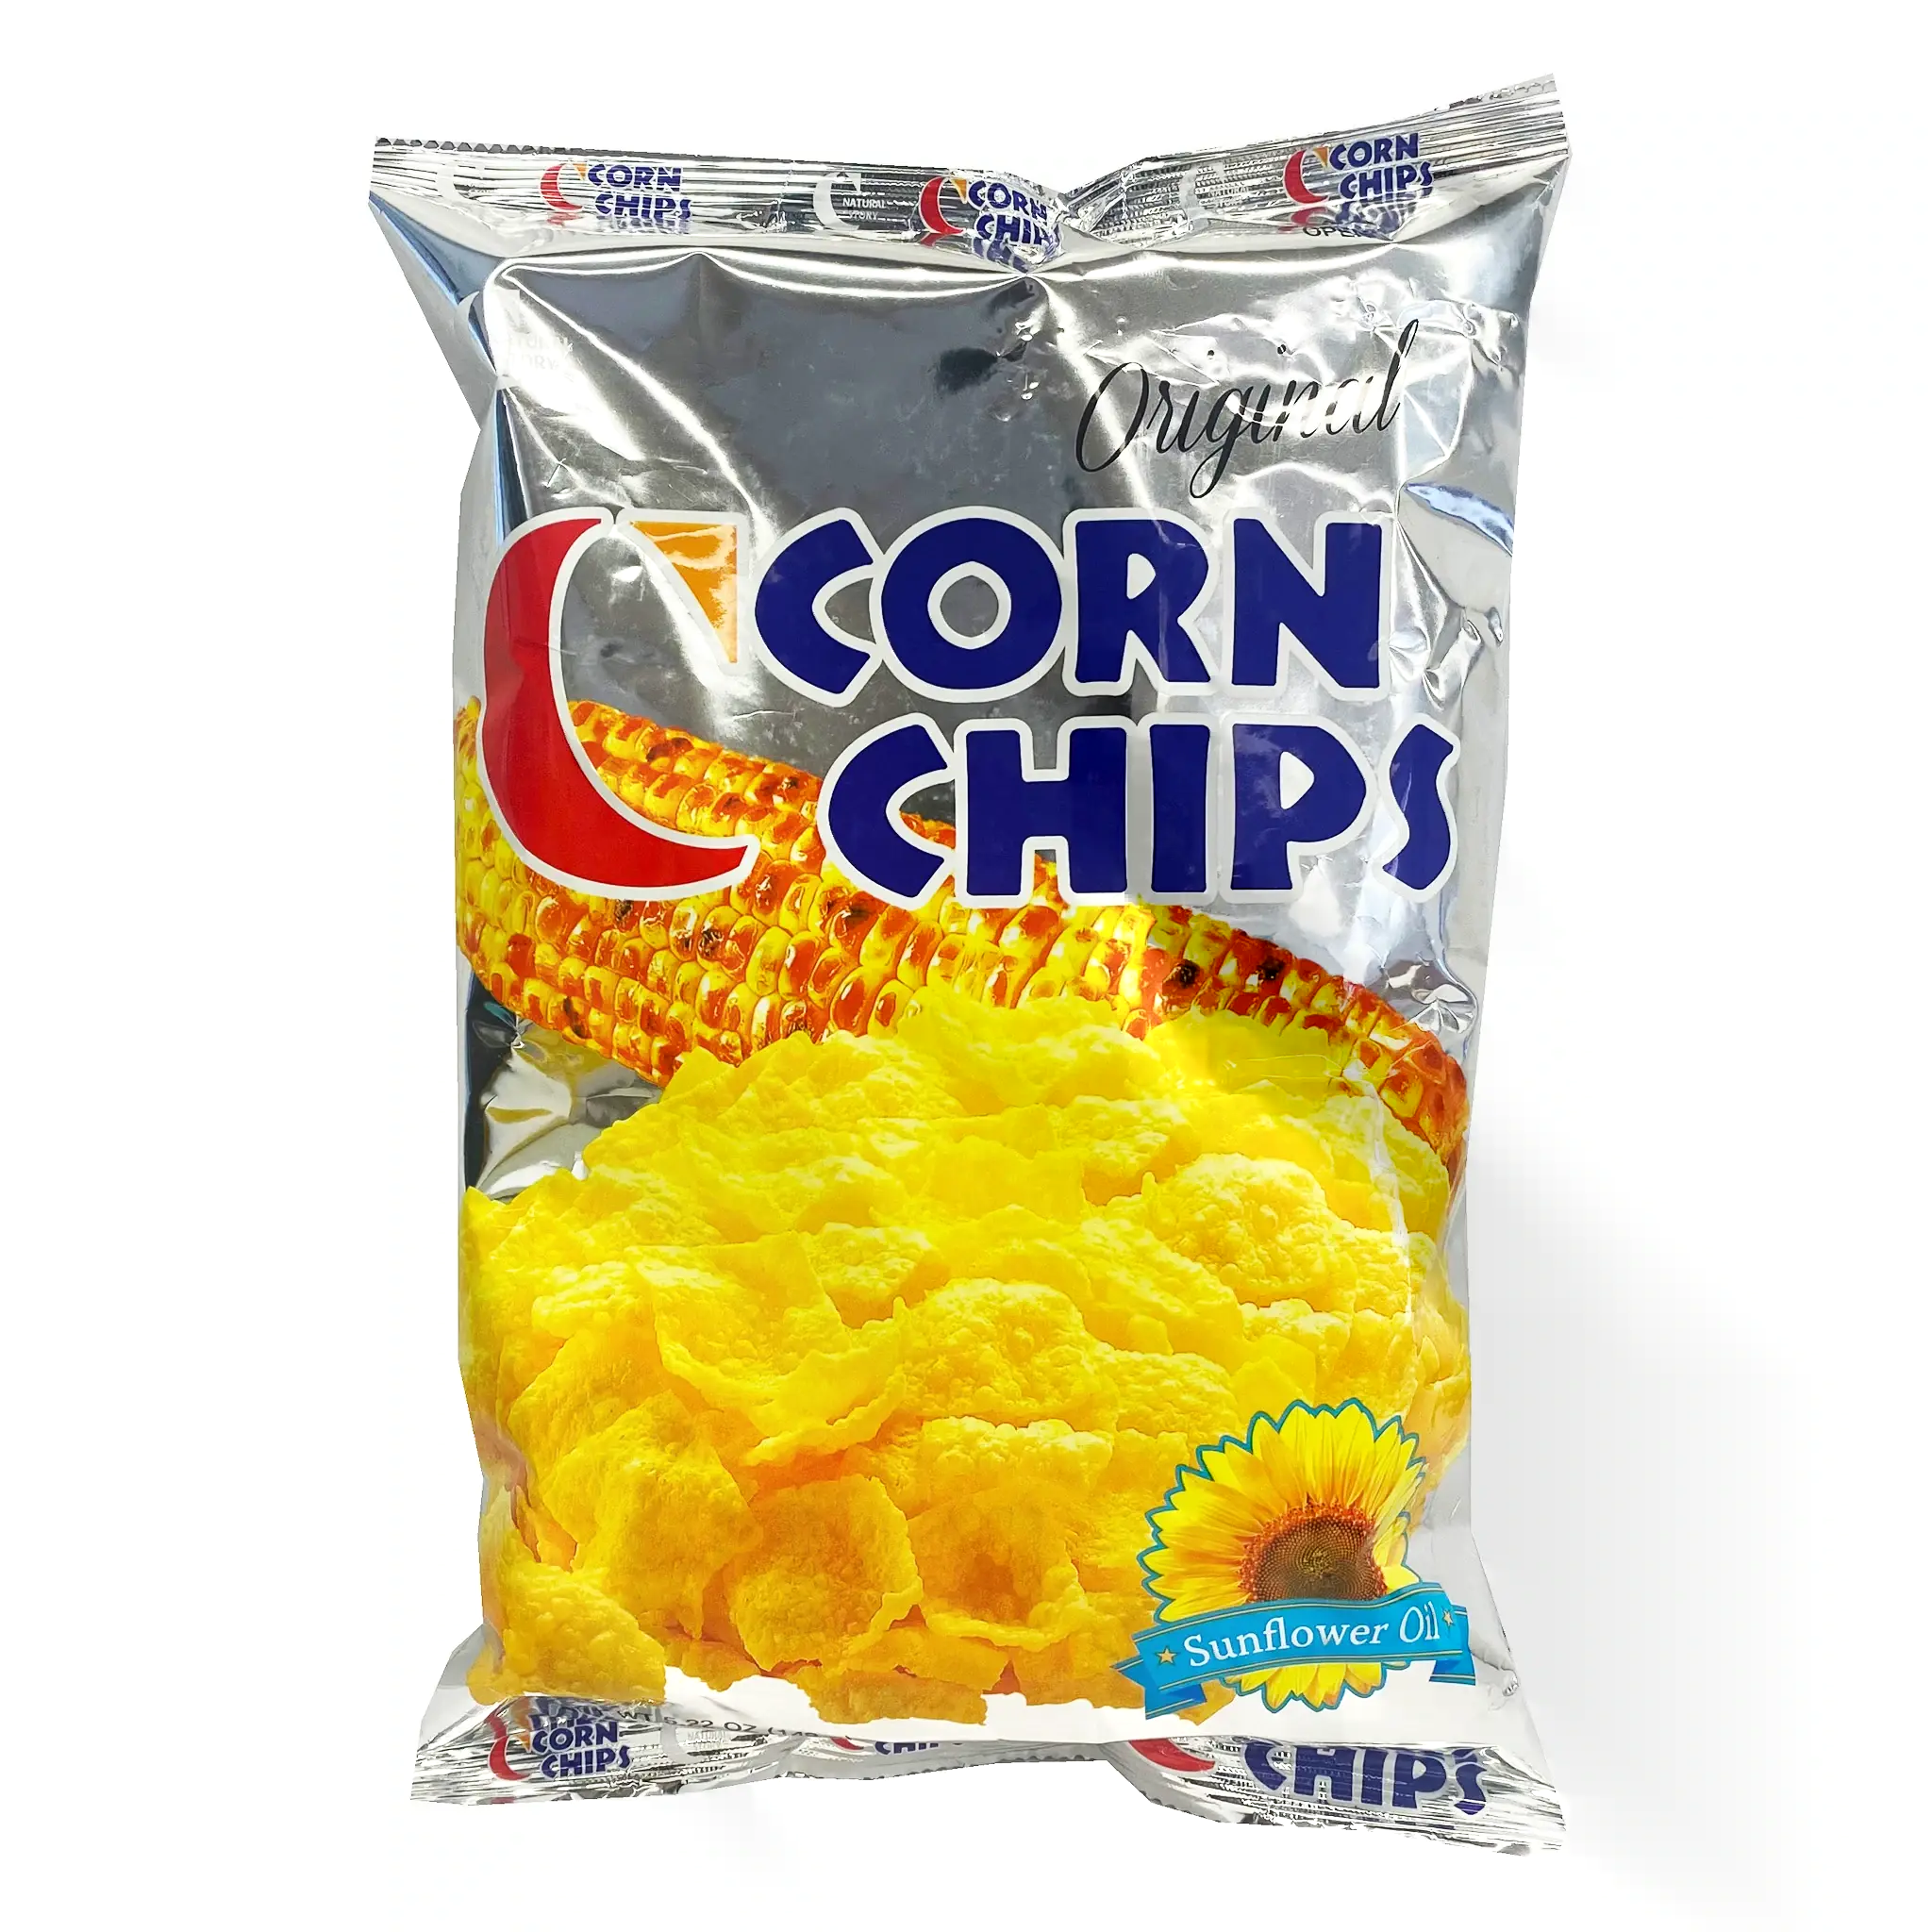 A shiny silver snack bag with a photo of large corn flakes on the front, along with an illustration of an ear of corn